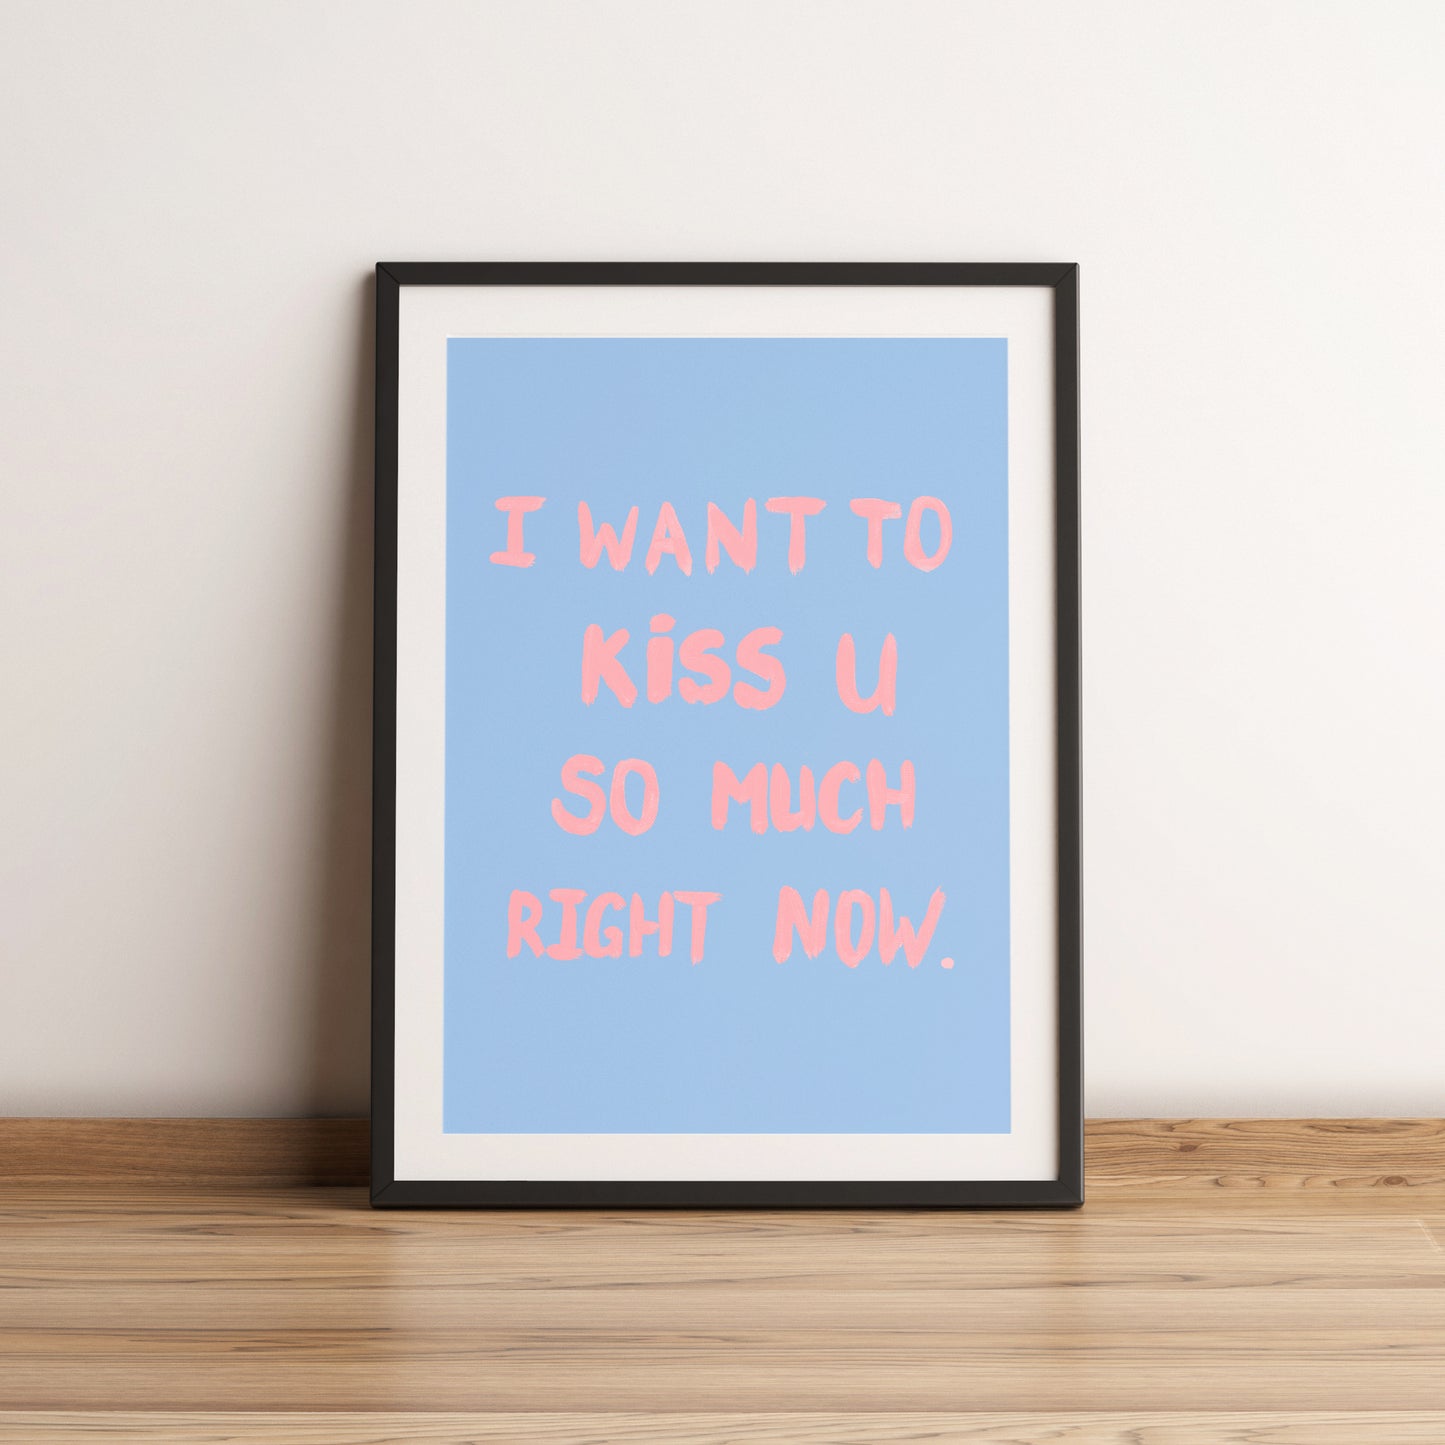 Kiss you. Love Quote Artwork. A4 Poster. Restock!